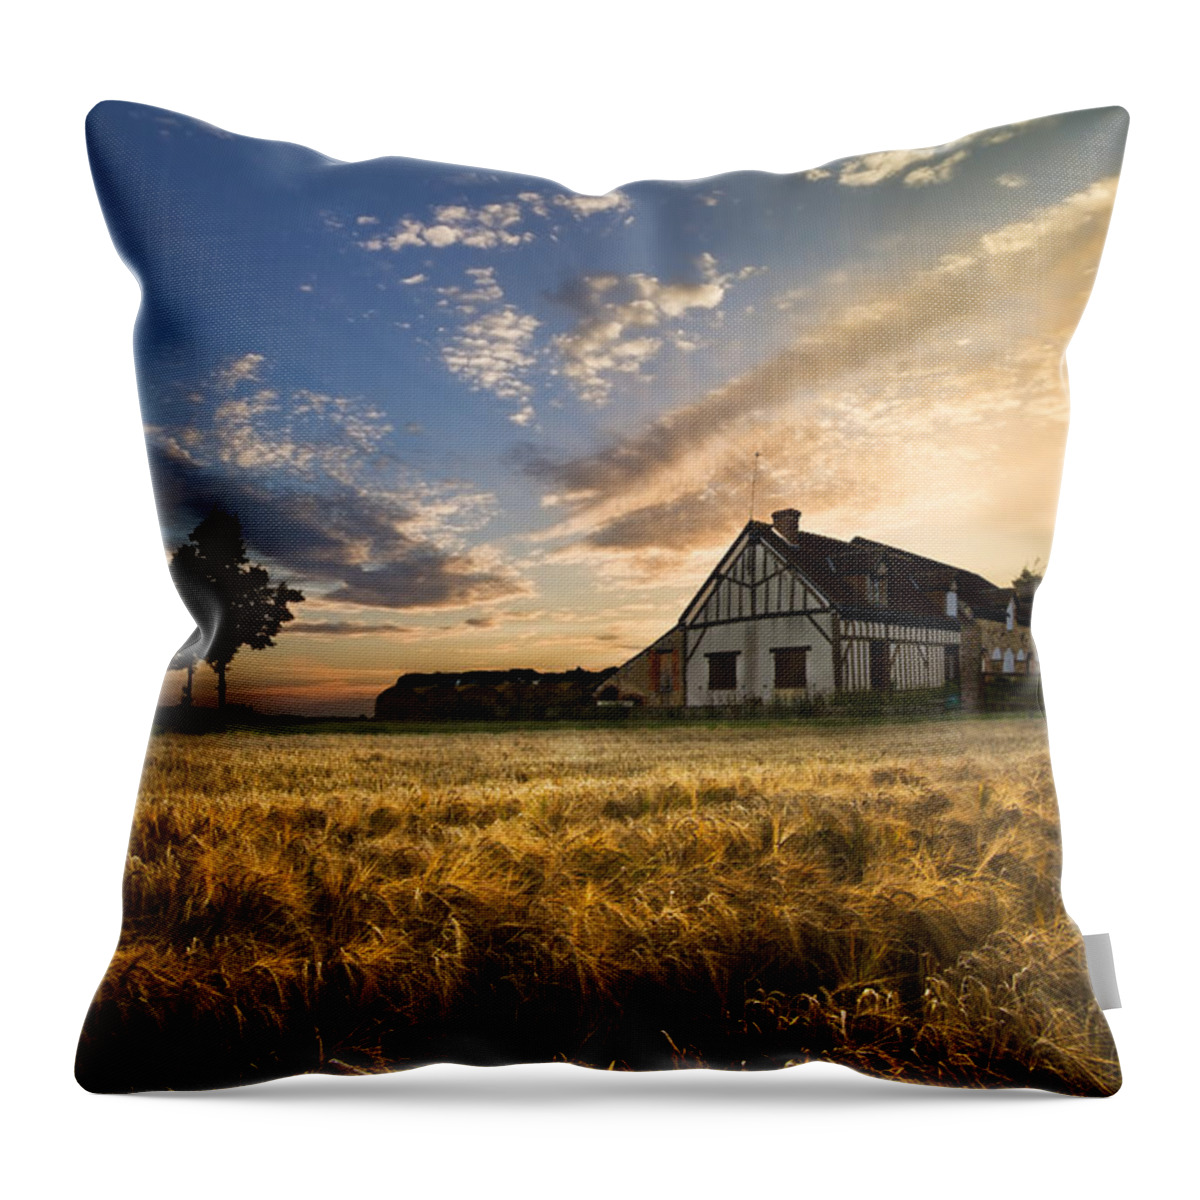 Appalachia Throw Pillow featuring the photograph Golden Evening by Debra and Dave Vanderlaan